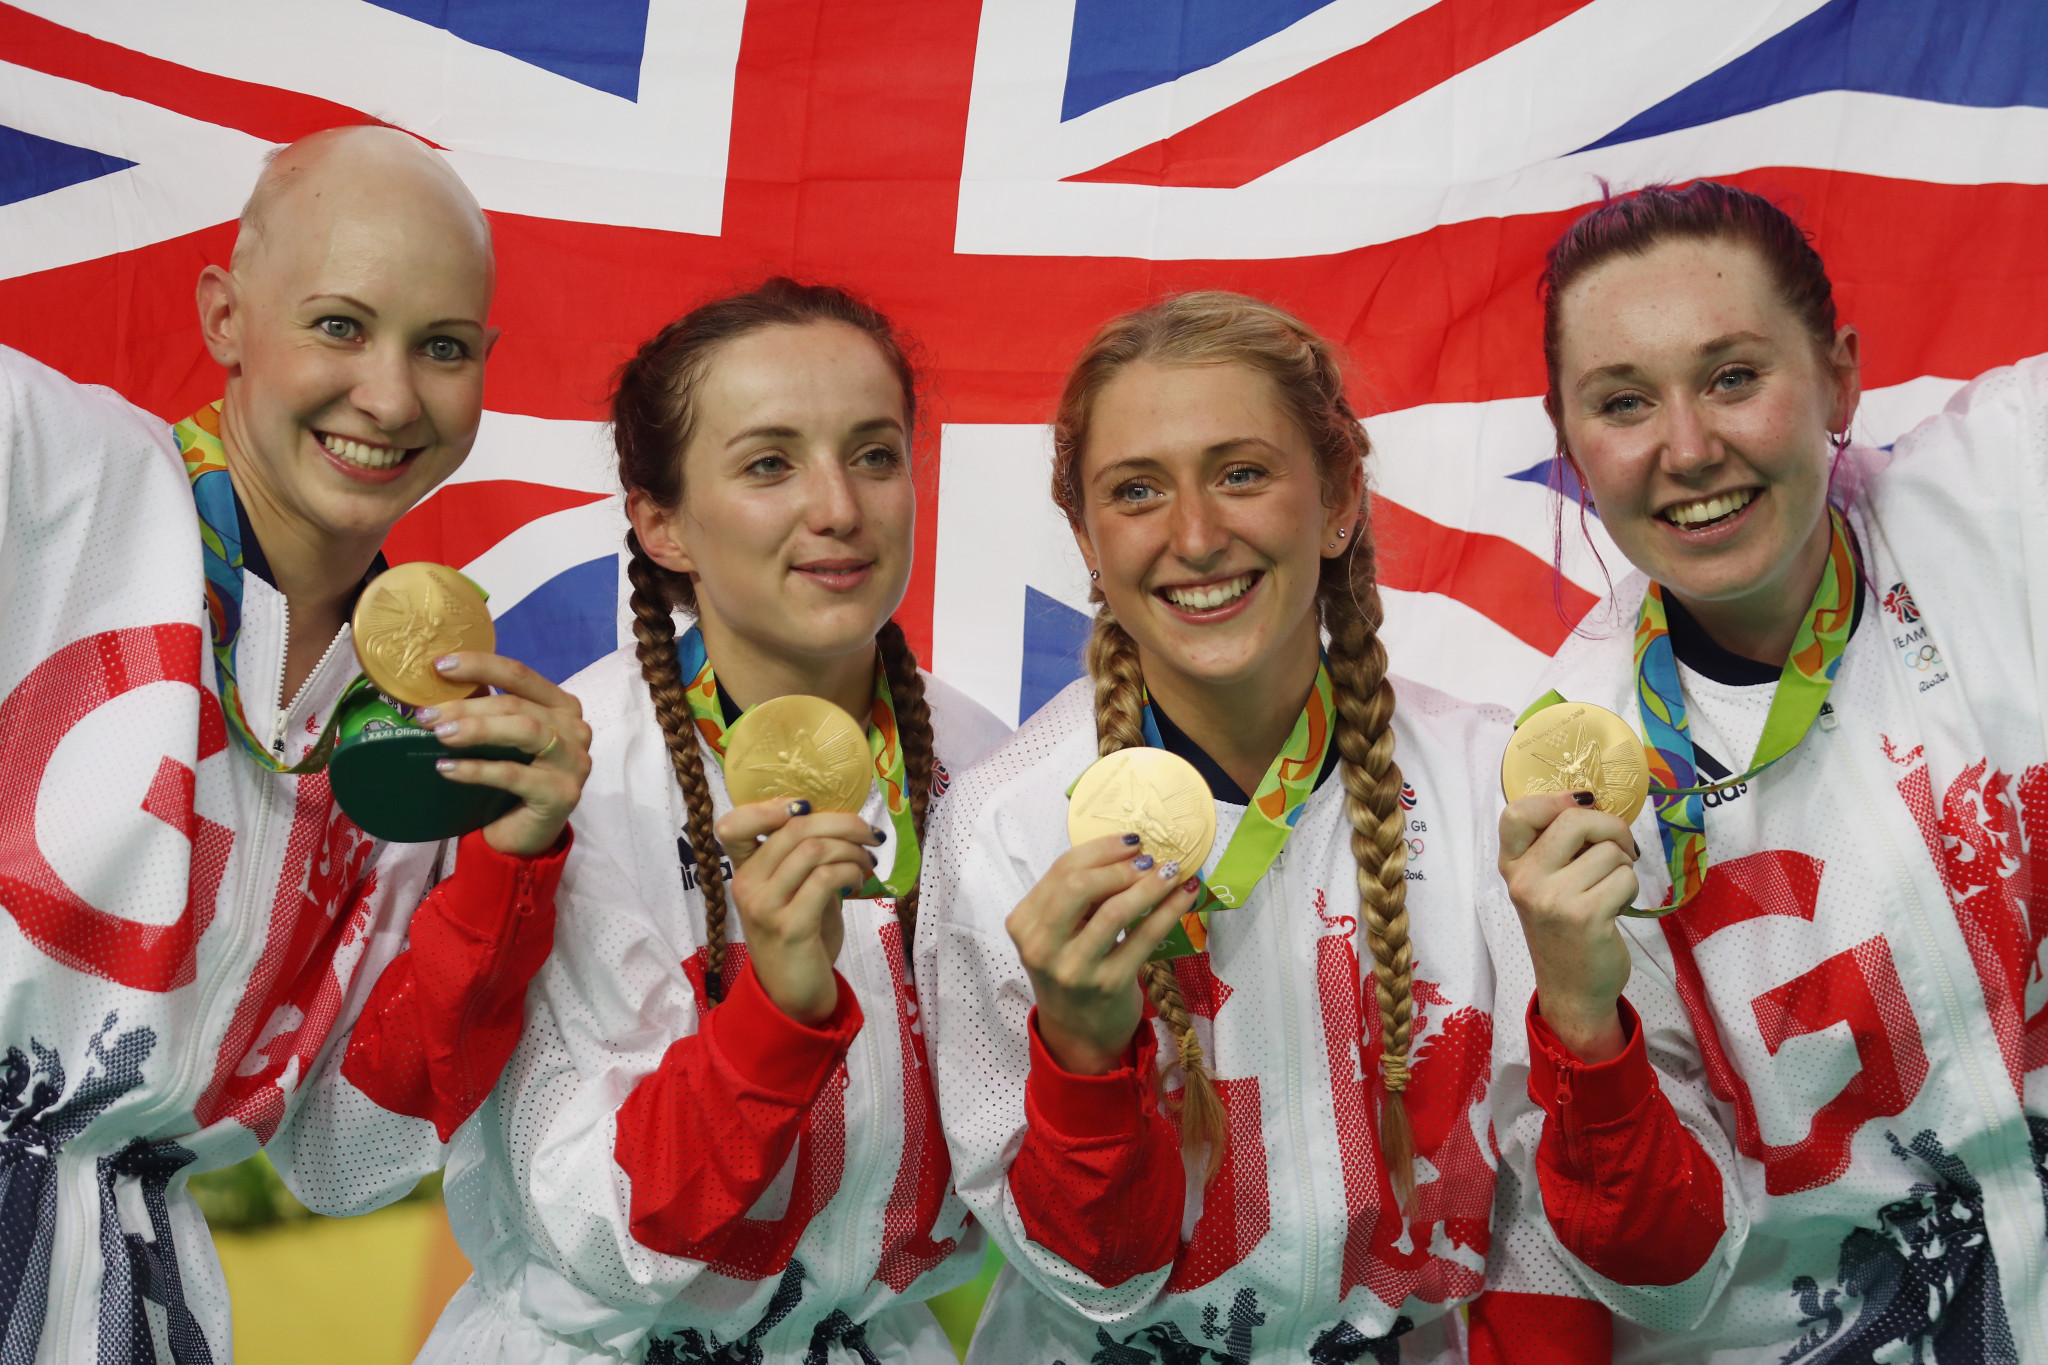 Britain finished second in the medals table at Rio 2016 ©Getty Images